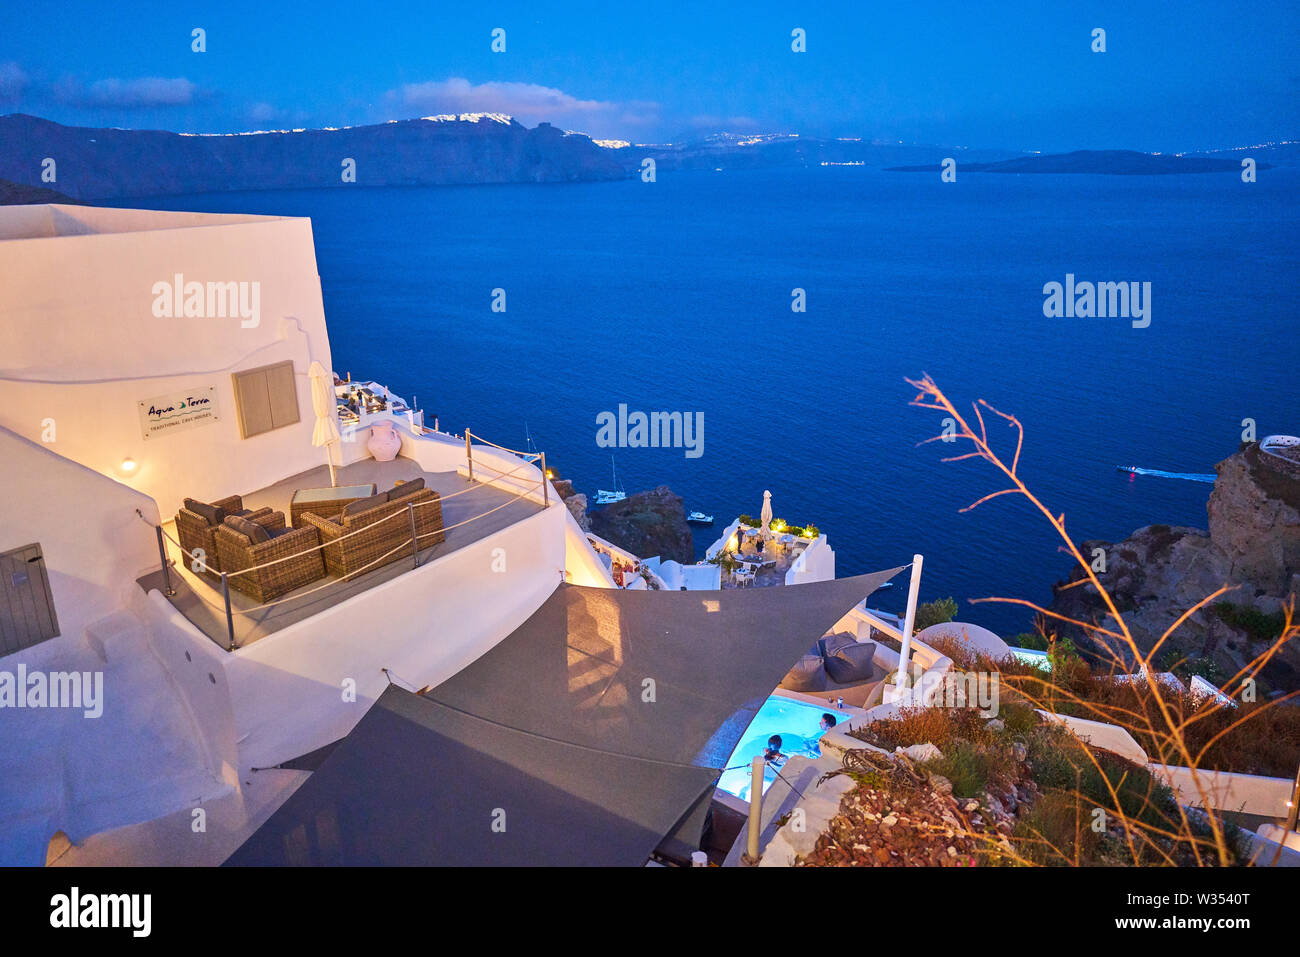 Tourists in luxury restaurants and on Oia Castle wait for the sunset with Caldera View and the famous Windmill in Oia, Santorini , Greece at 04 June 2 Stock Photo